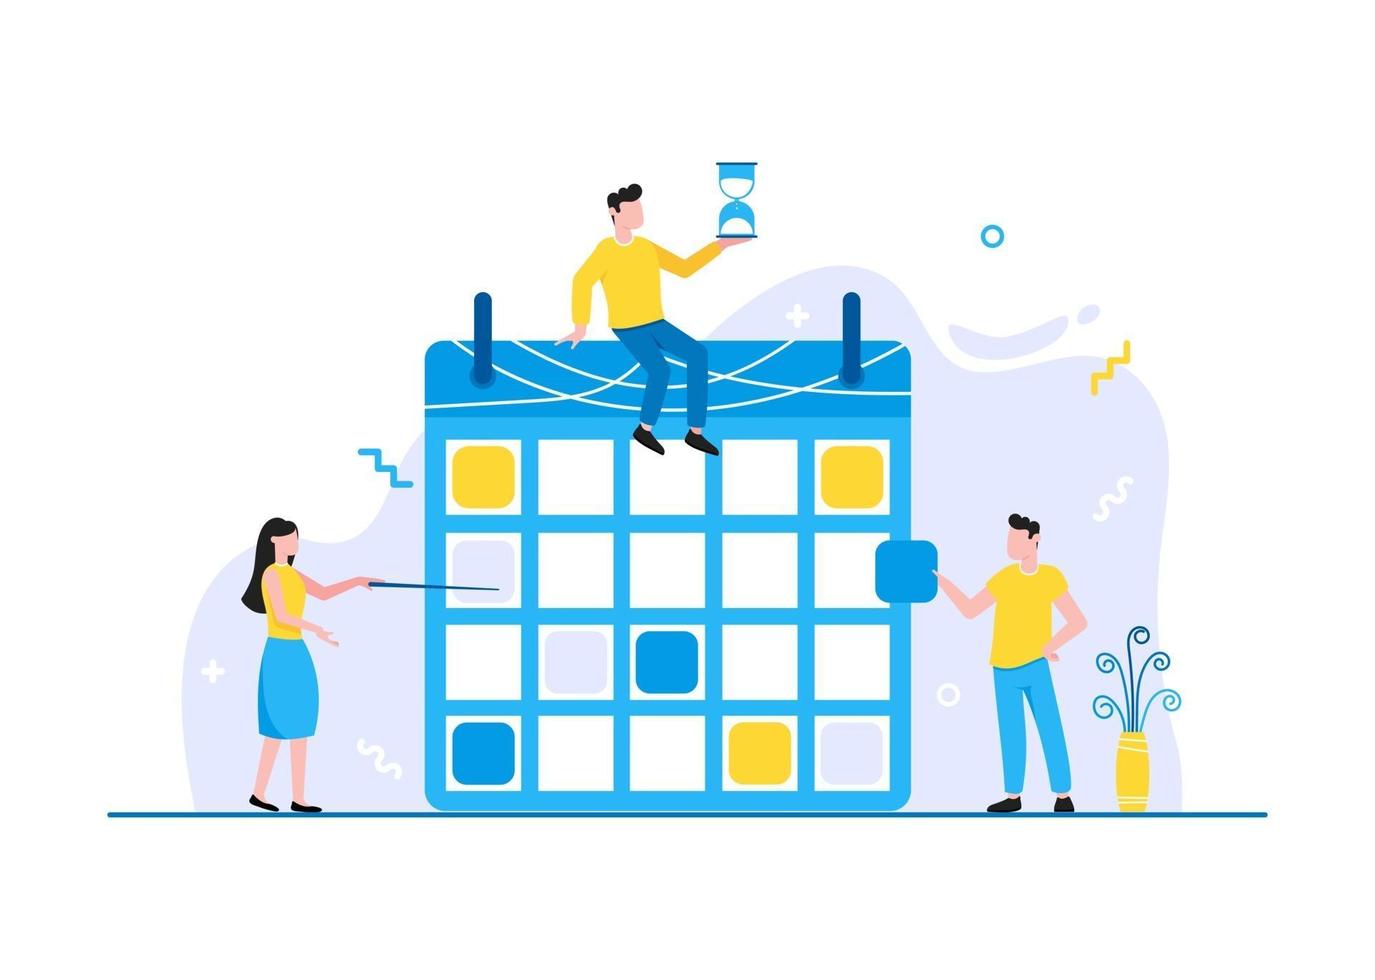 Tiny people characters working together with calendar schedule and fill out task on week schedule Teamwork and time management concept flat style design vector illustration isolated white background